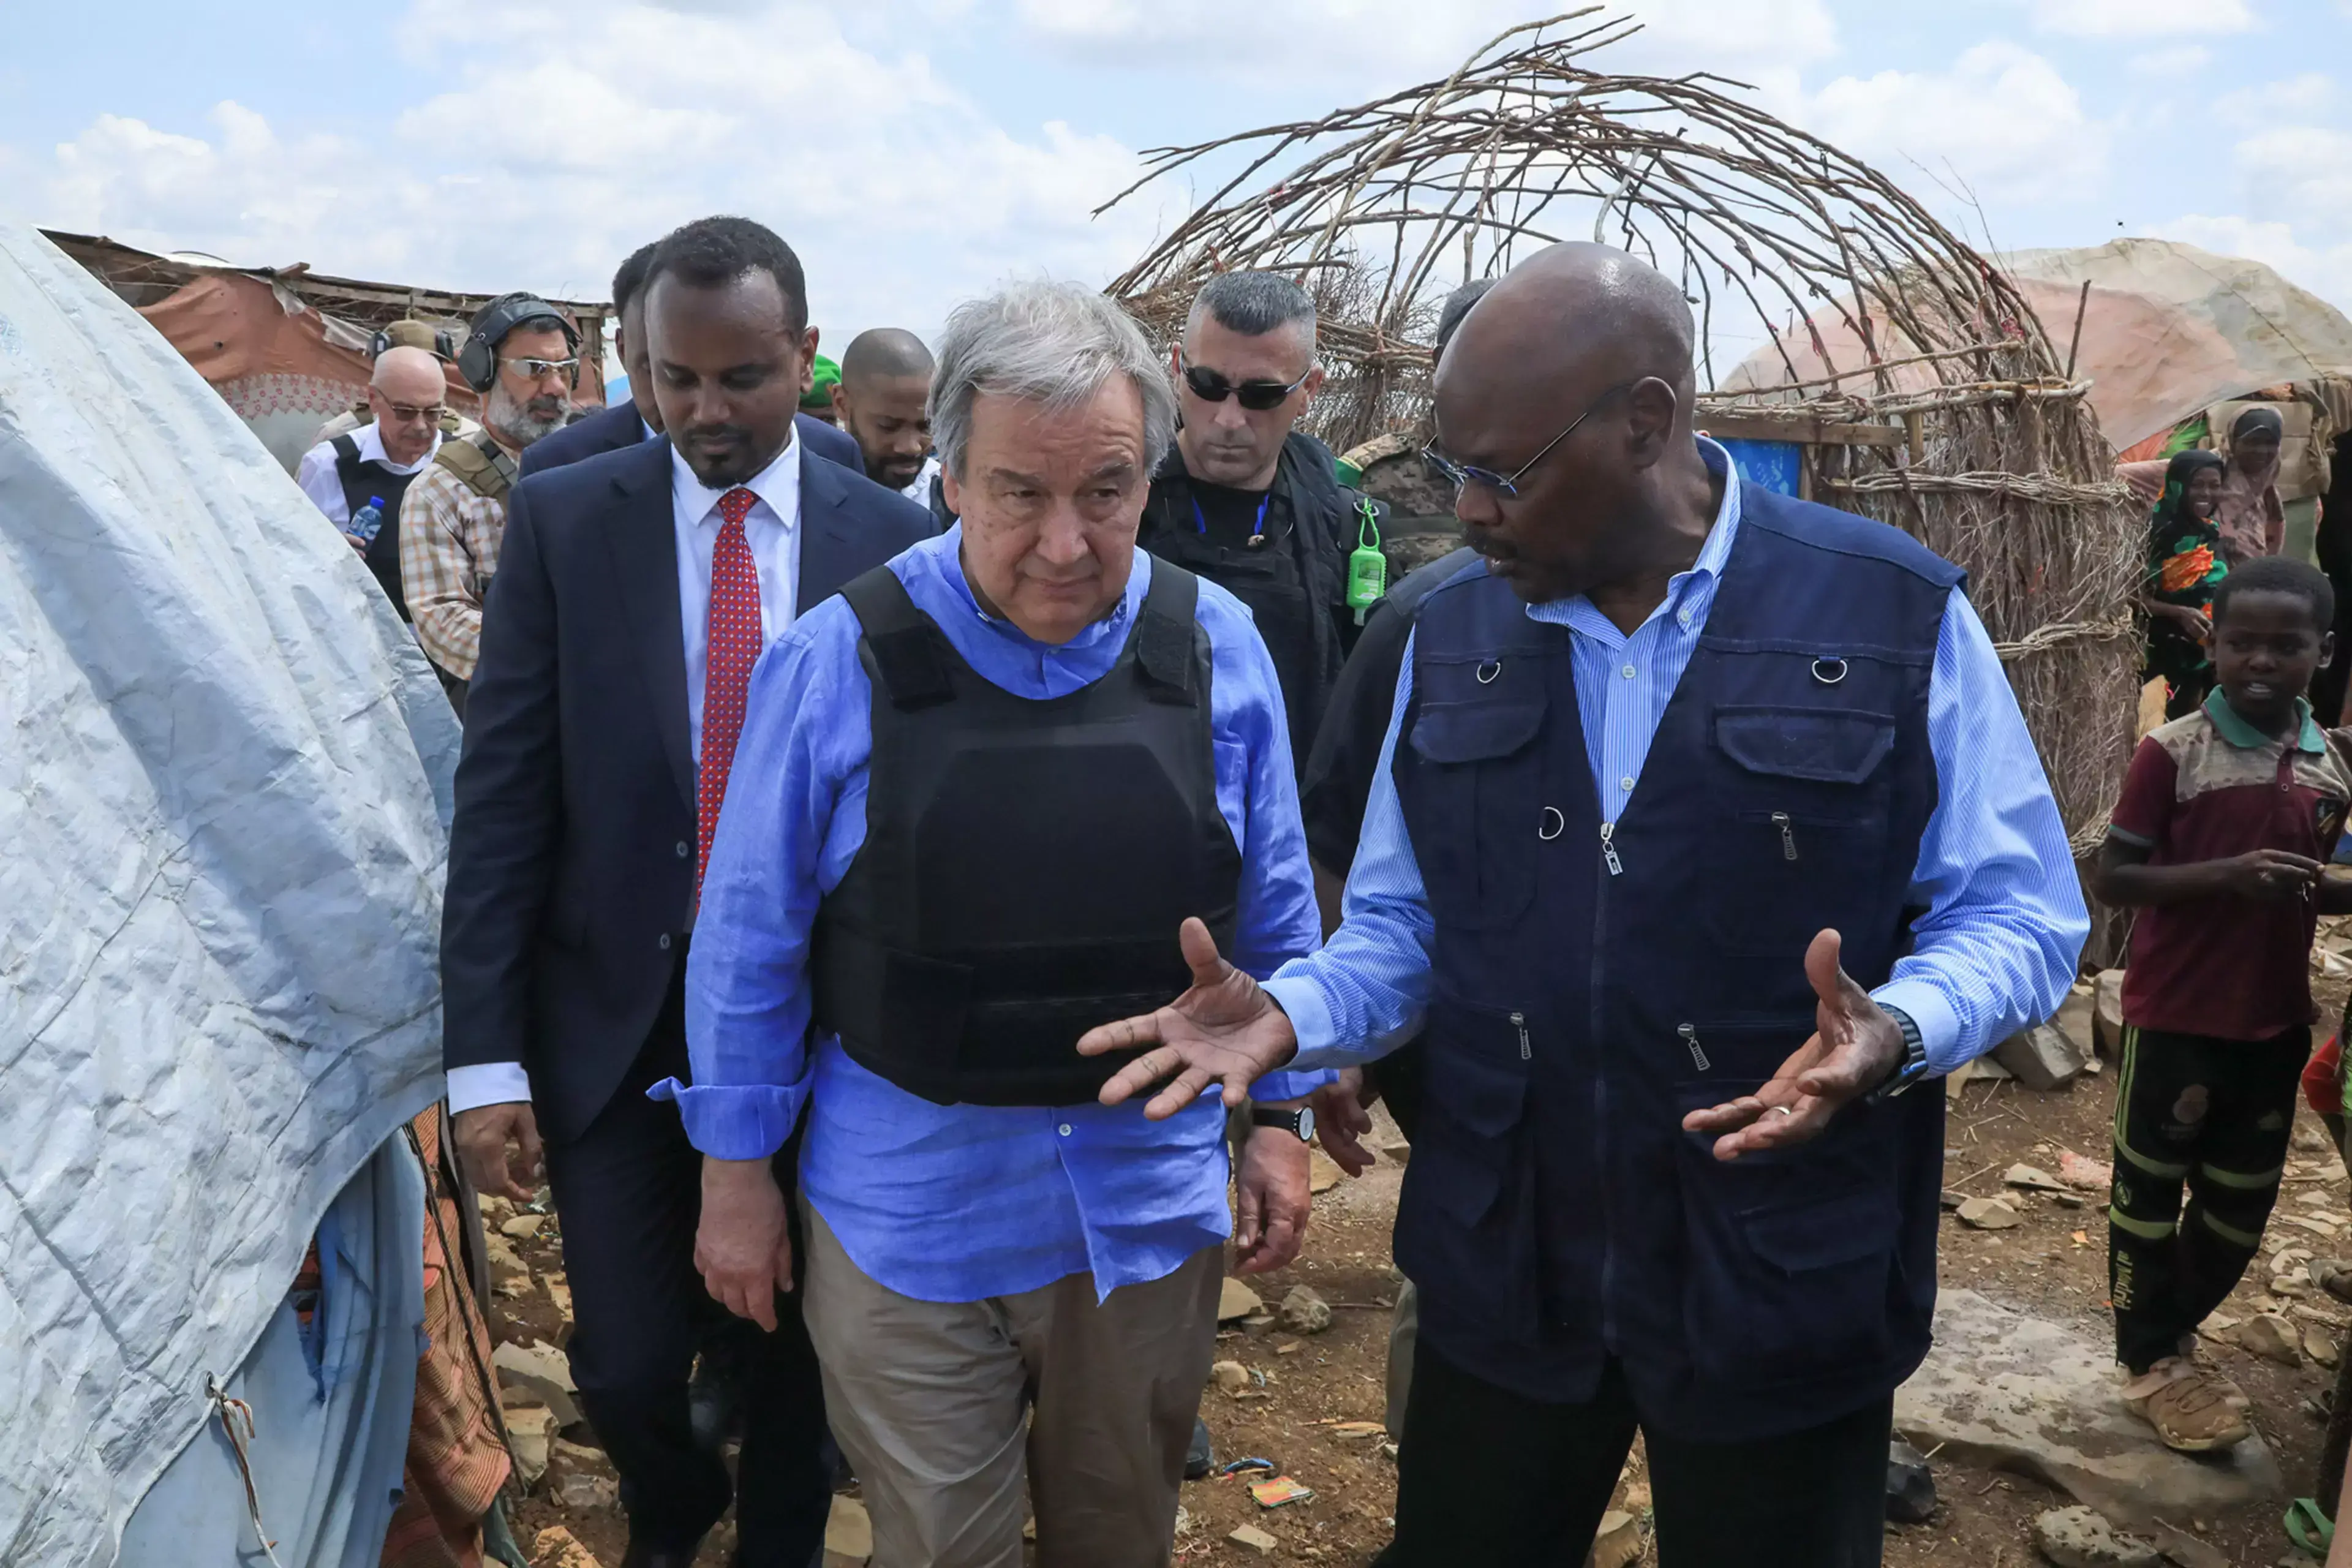 Secretary-General António Guterres visits an internally displaced persons camp in Somalia.